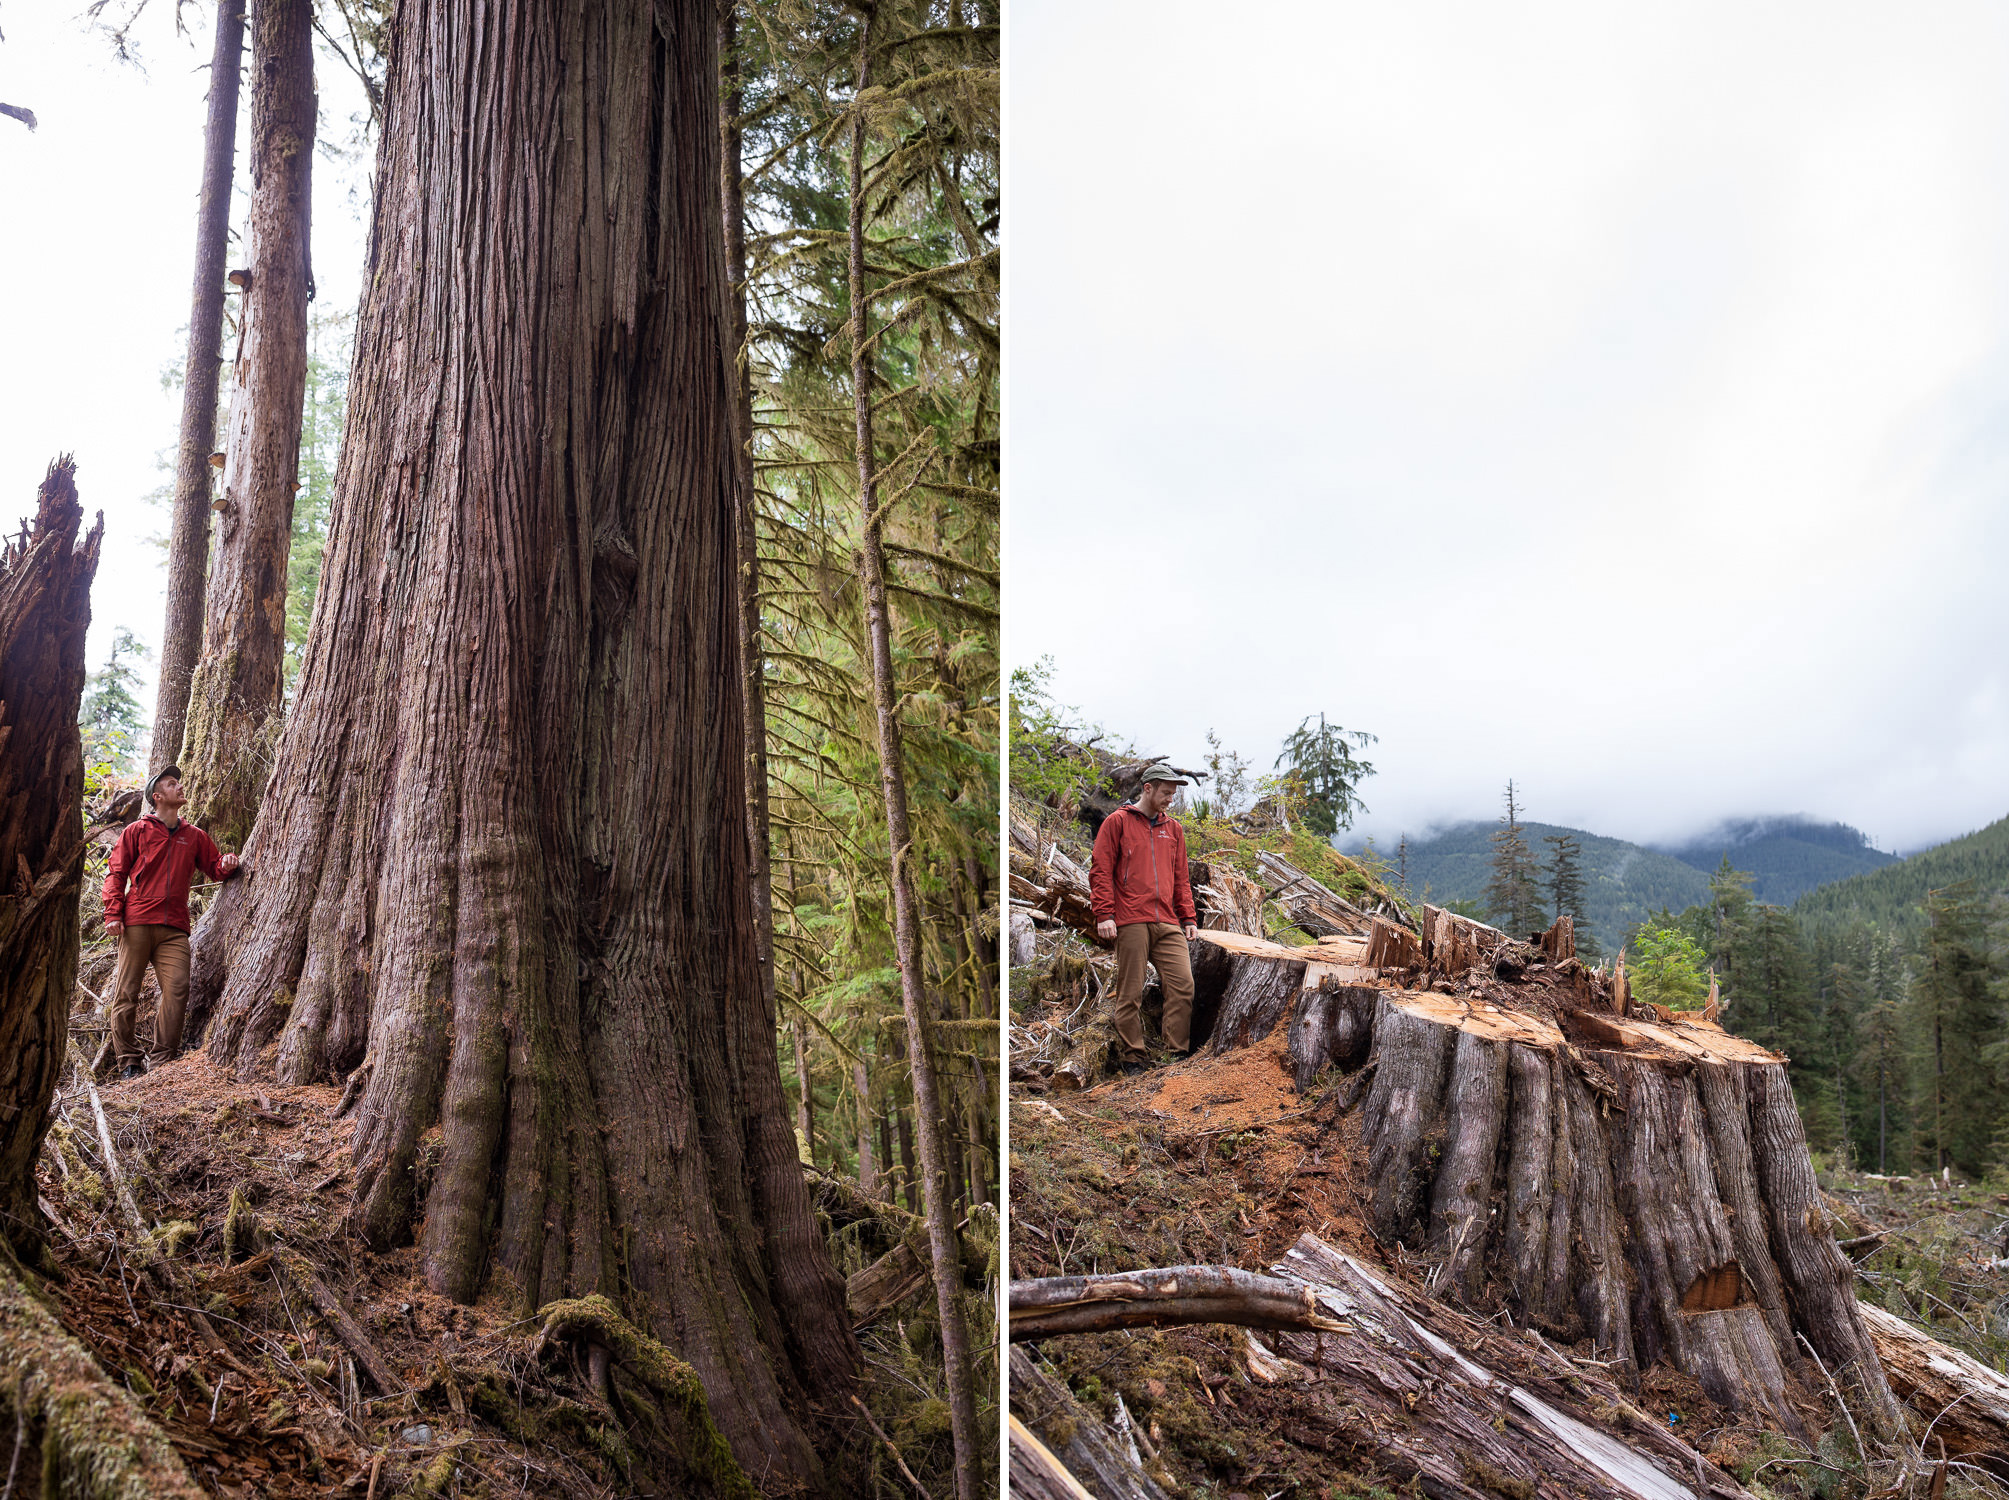 Before-and-after images of old-growth logging in the lower Caycuse Valley, captured by AFA conservation photographer TJ Watt.